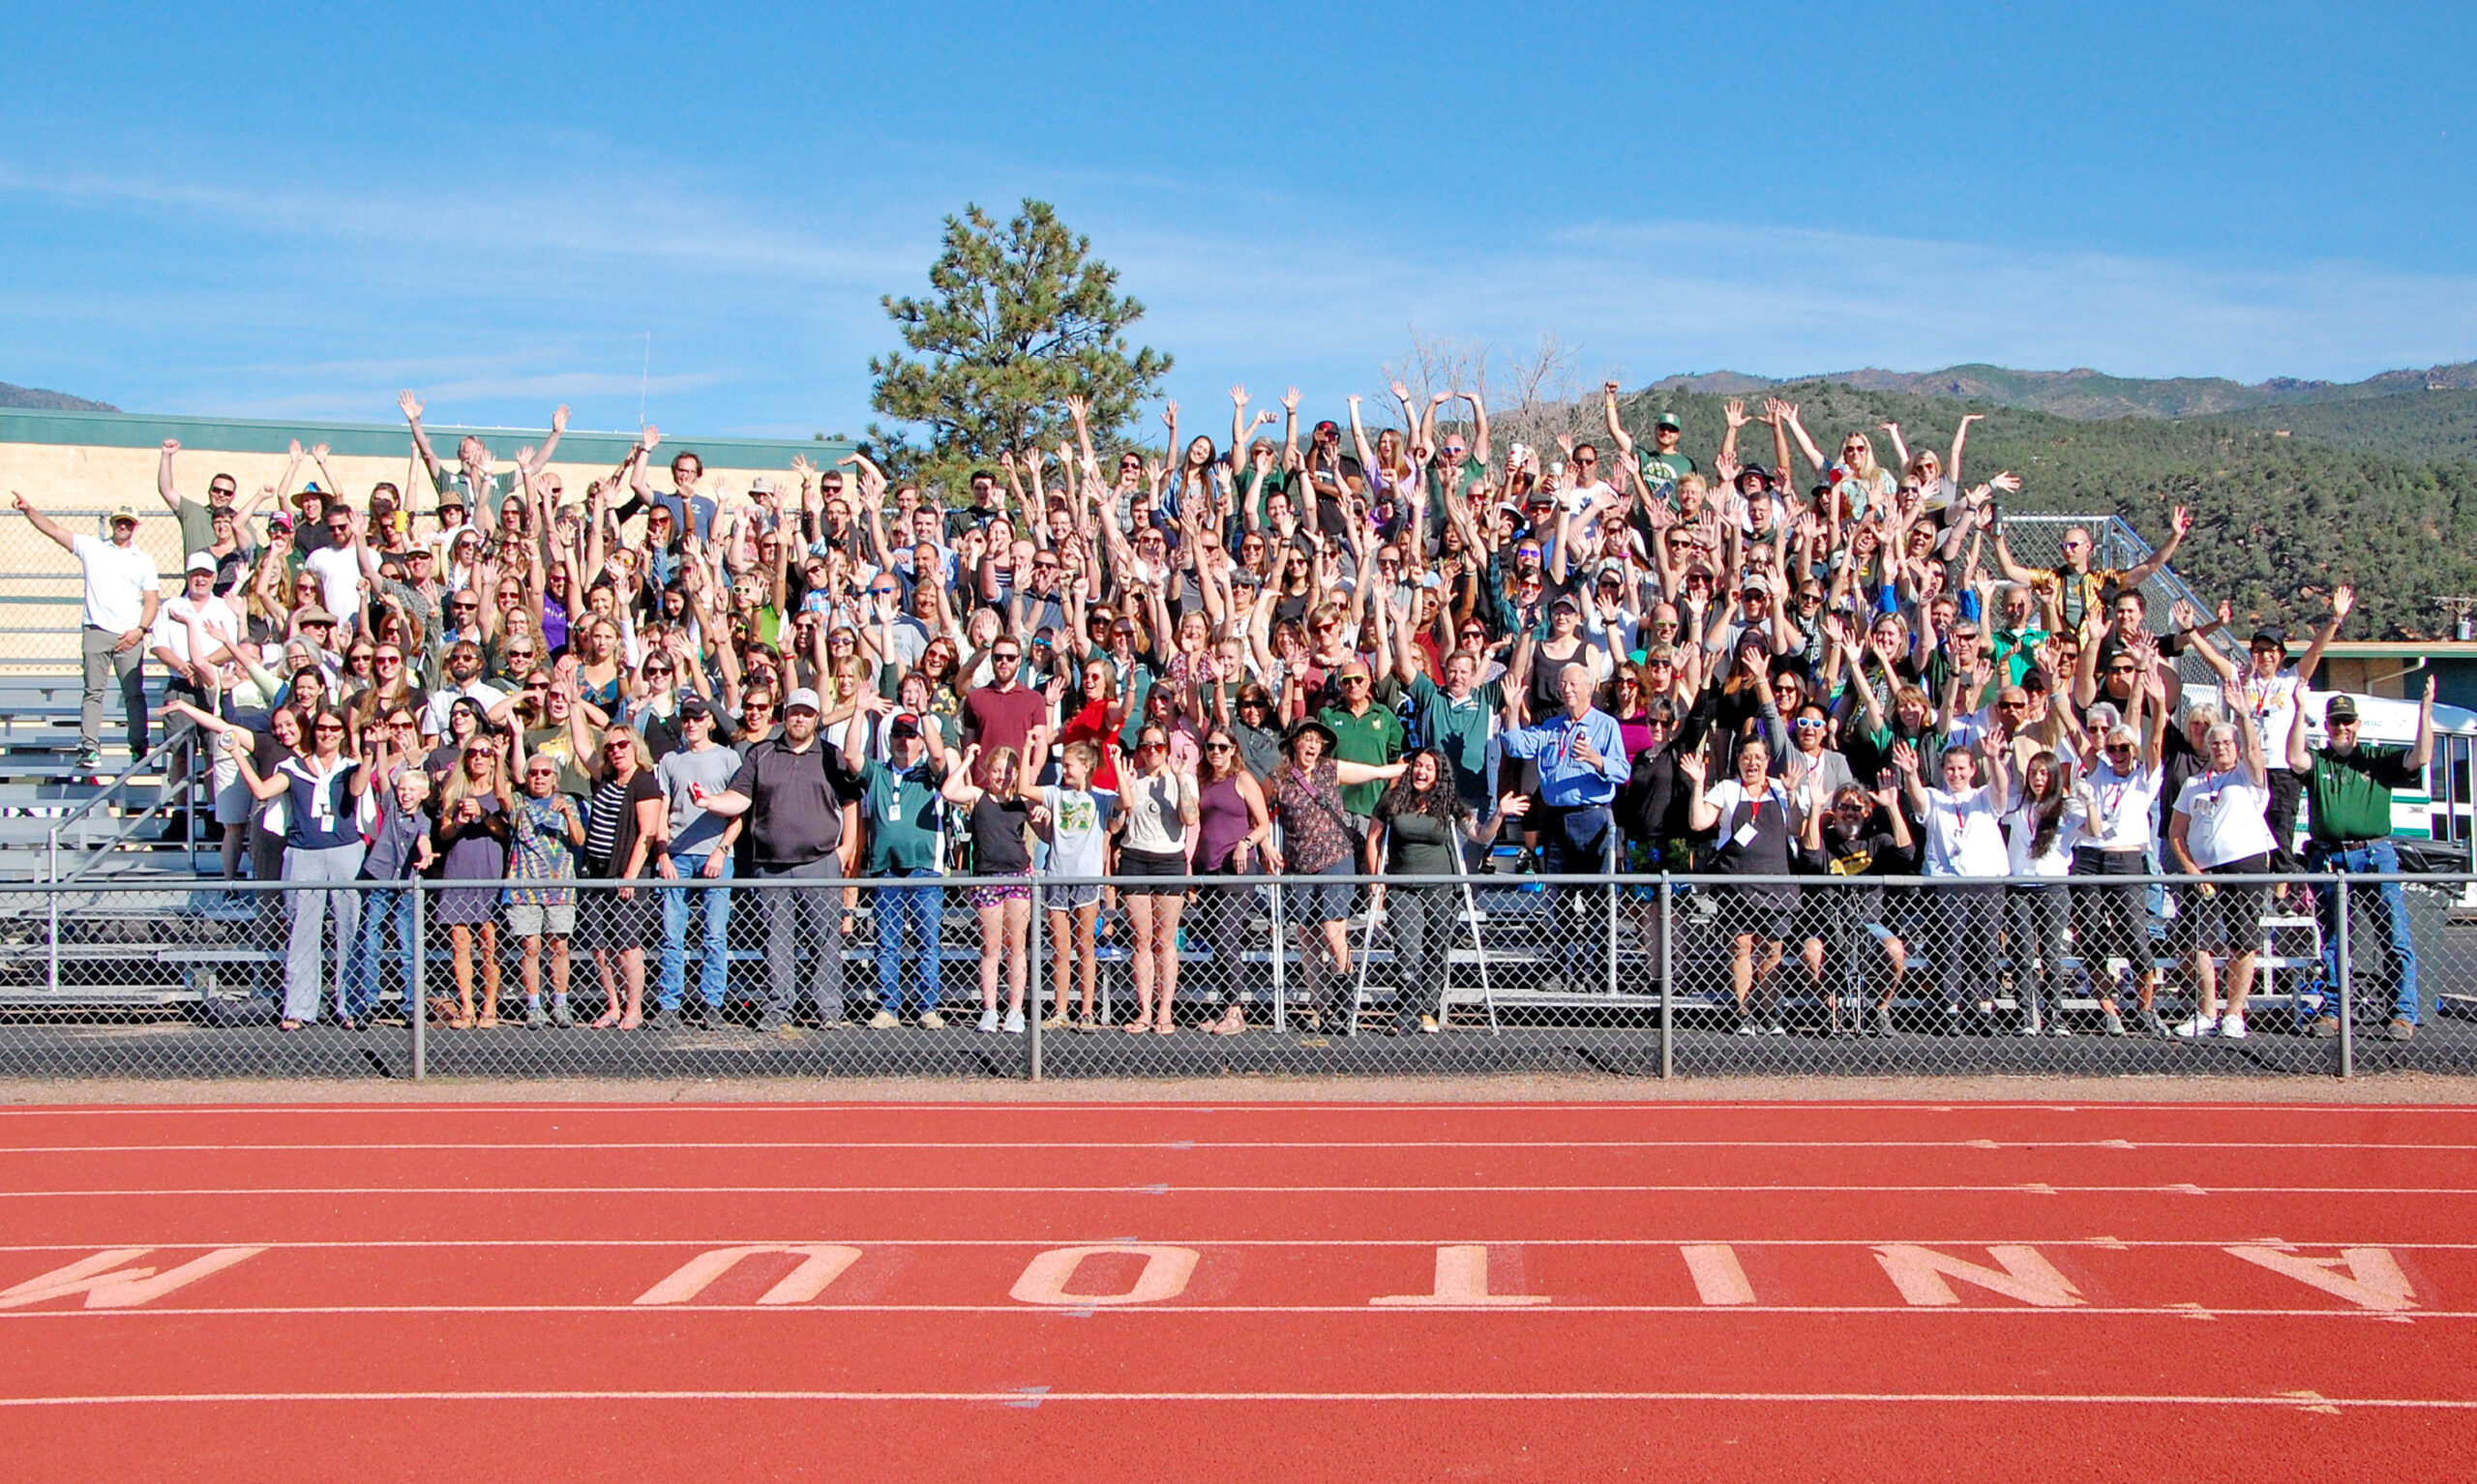 Photo by Rhonda Van Pelt. District 14 teachers, staff and administrators wave from the bleachers at Manitou Springs High School on Monday, Aug. 15.